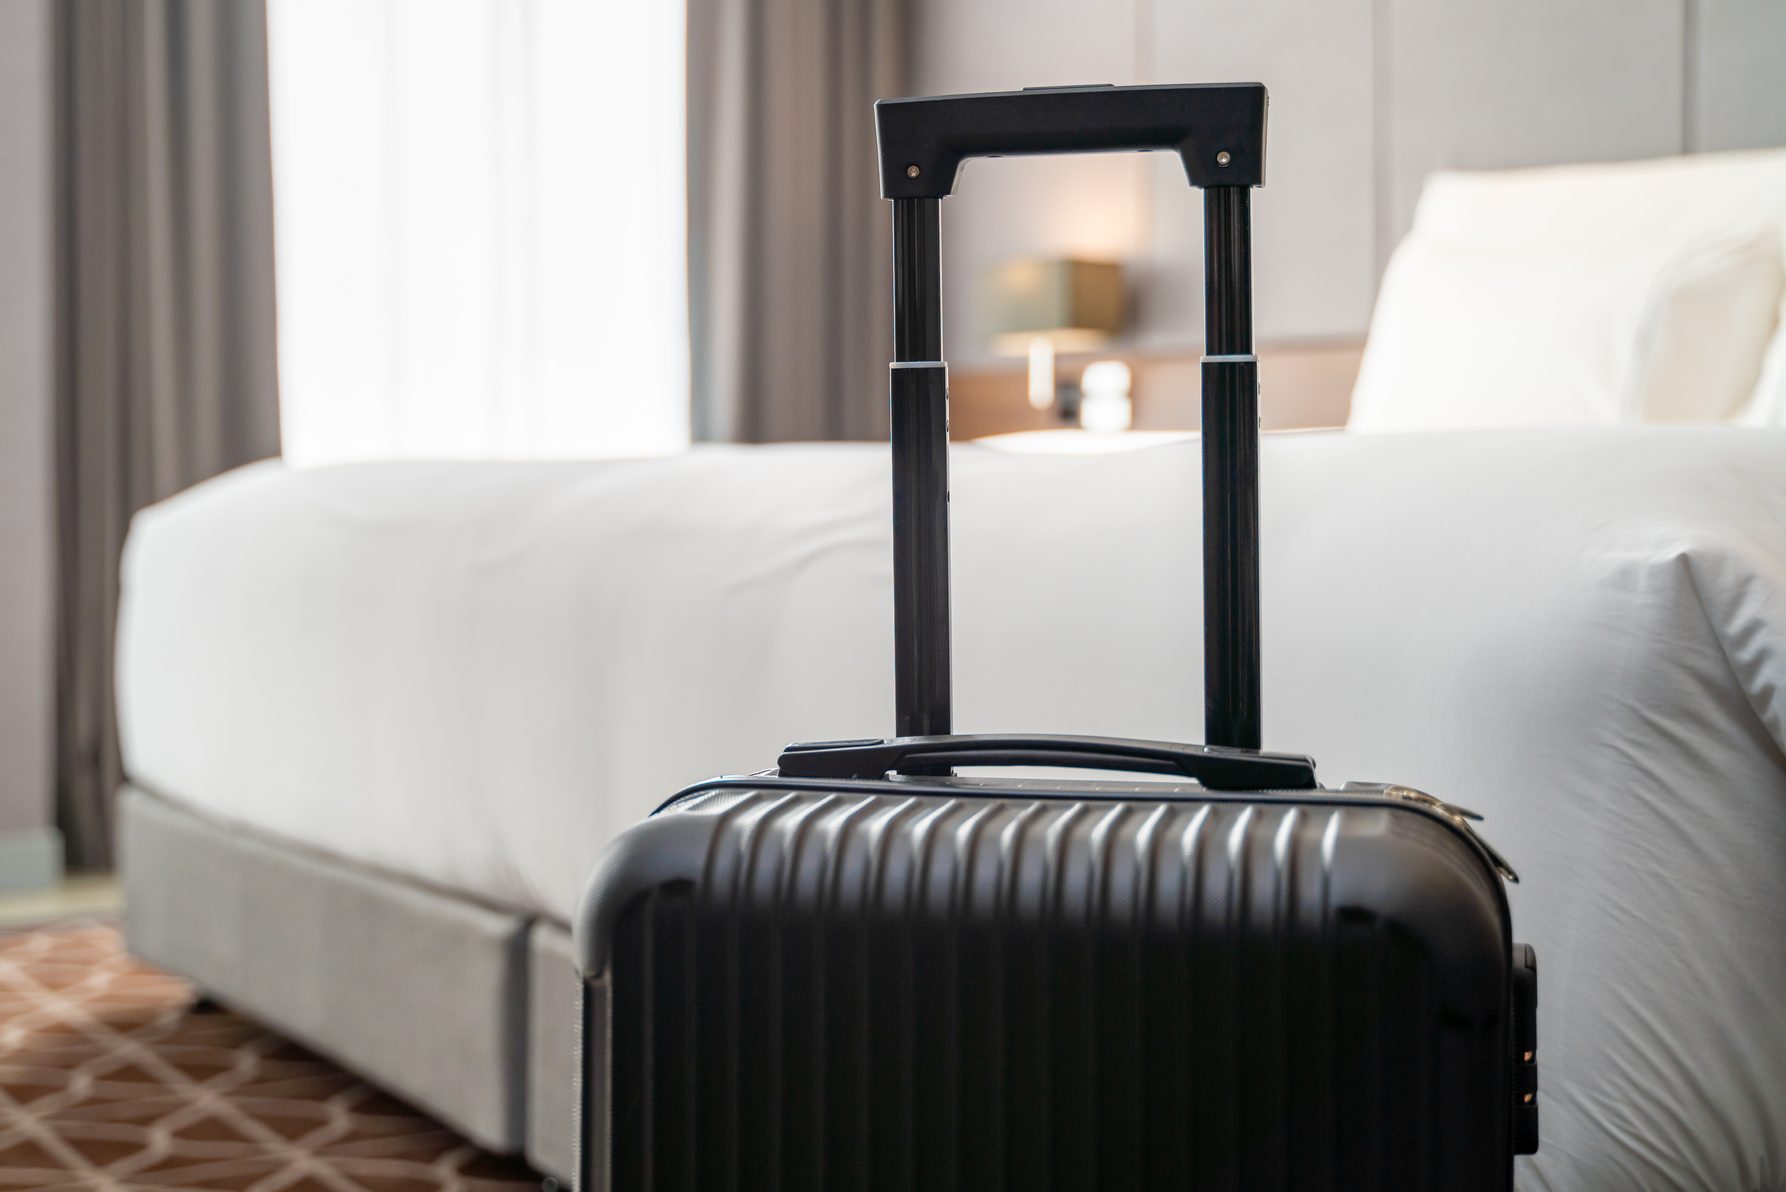 <p>This is one of those cruise tips you'll <em>really</em> be glad you know before your next trip. Many people overpack their main luggage and don't give enough thought to what they're toting in their carry-ons. Remember: It takes several hours <em>minimum</em> to get your luggage to you. Luggage times can range from a couple of hours to half a day, depending on staffing levels and your cabin location. This is why it's essential to have a day pack with anything you'll need right away—and don't forget the fun stuff!</p> <p><strong>What to do instead</strong><strong>:</strong> Pack a <a href="https://tourparavel.com/products/fold-up-bag" rel="noopener">roomy carry-on</a> with medication, contact solution, a change of clothing, a <a href="https://www.rd.com/list/best-swimsuits-for-body-type/">swimsuit</a>, <a href="https://www.rd.com/list/best-natural-sunscreens/">sunscreen</a>, <a href="https://www.rd.com/list/best-sunglasses-uv-protection/">sunglasses</a>, sandals or other items you'll want to have immediate access to.</p>